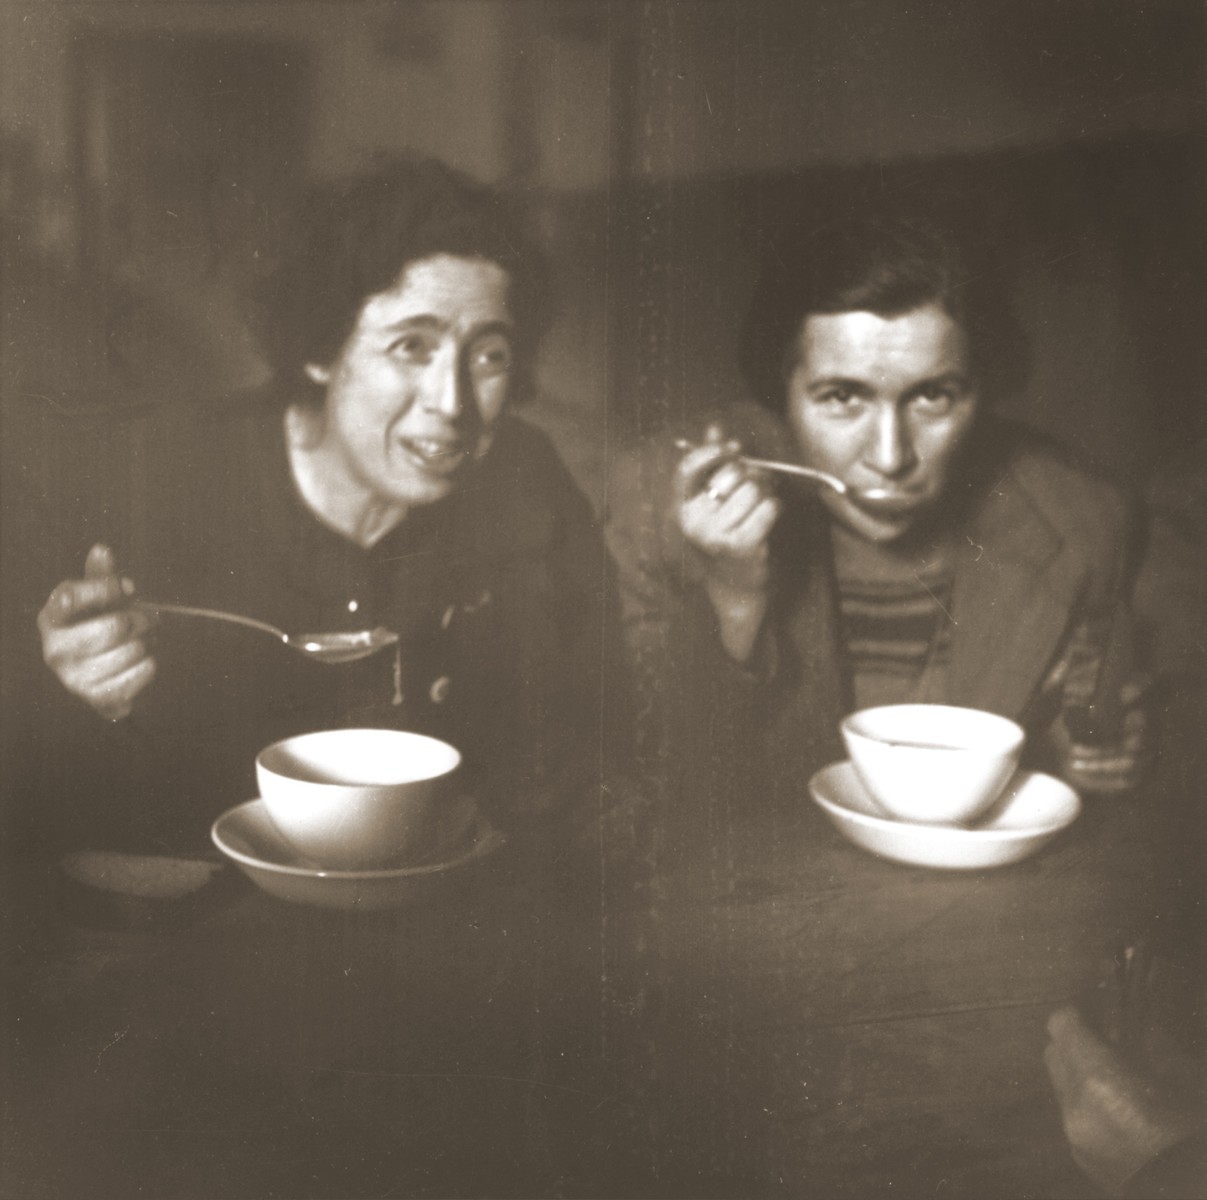 Two Jewish women rescued from Theresienstadt enjoy a warm meal in the Hadwigschulhaus in St. Gallen.